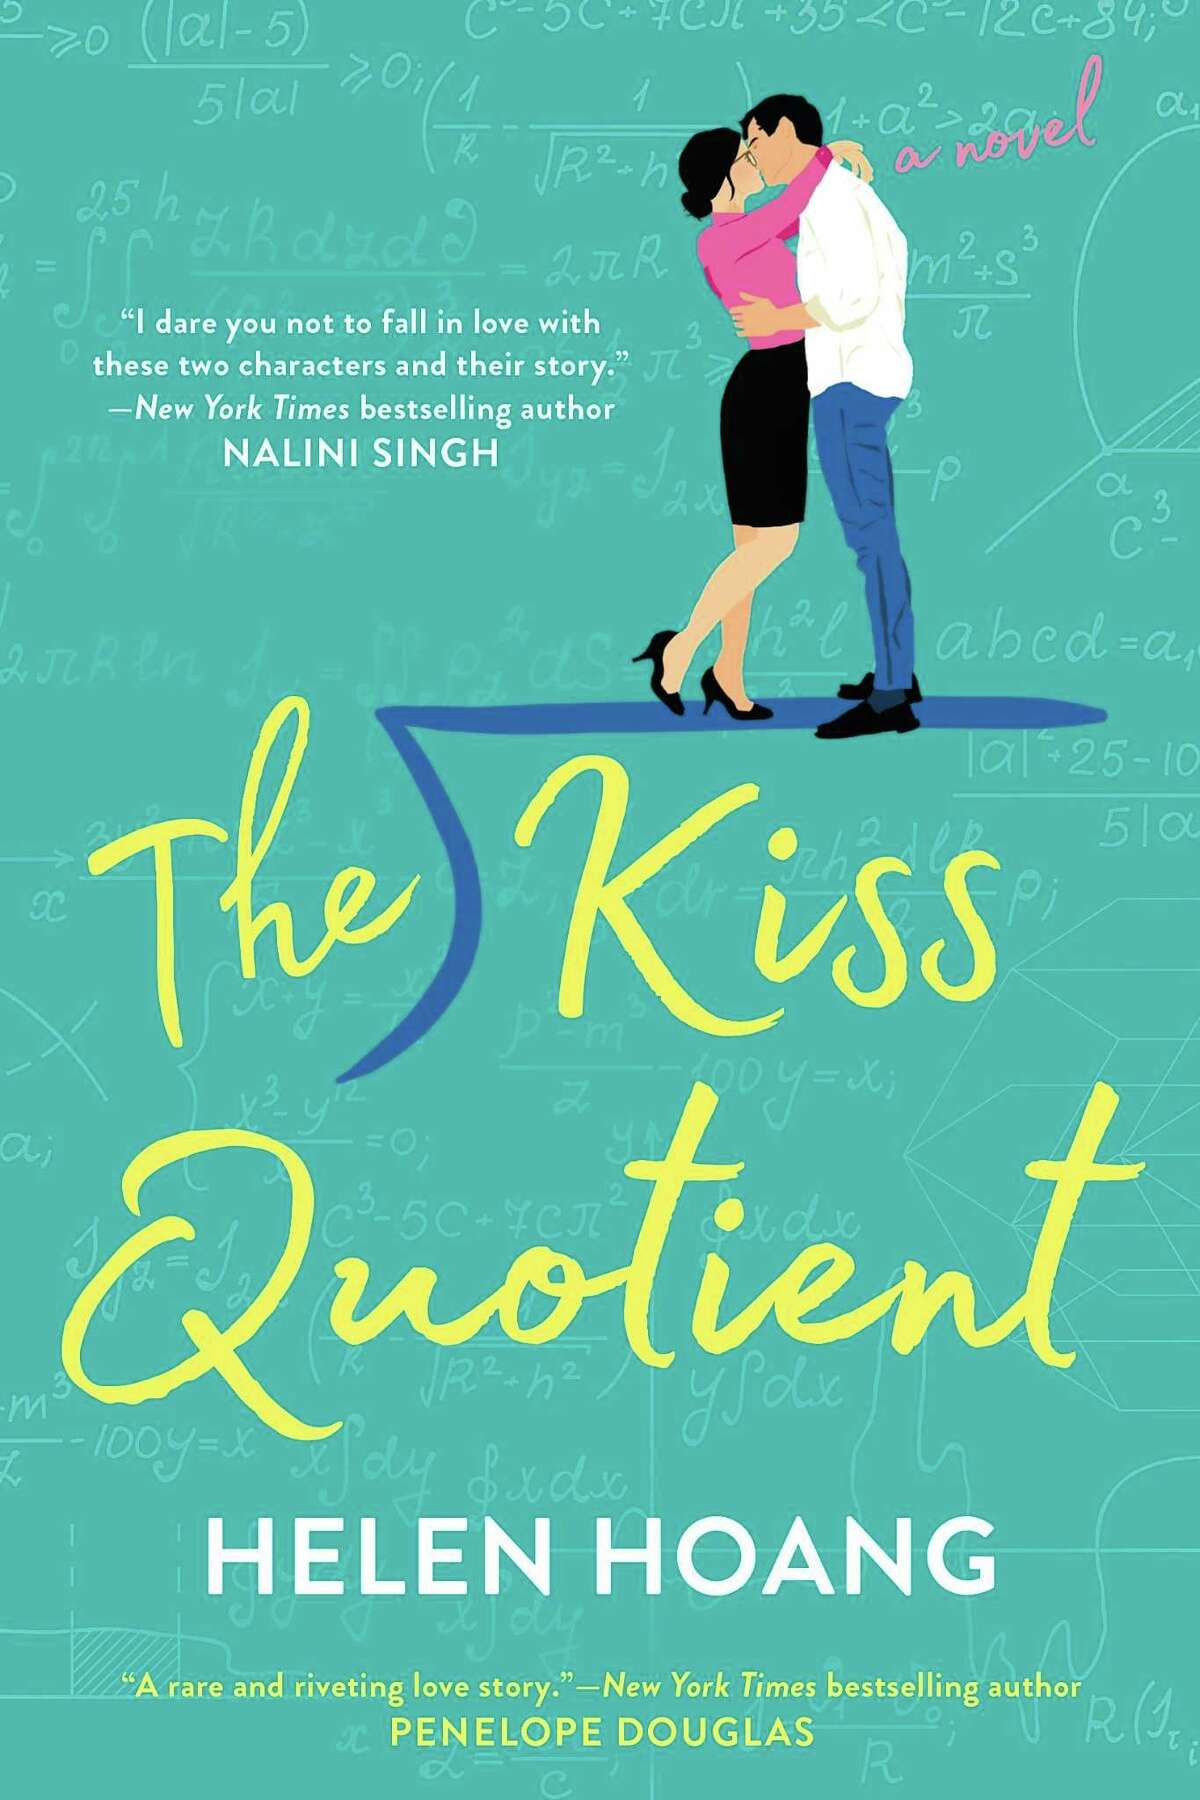 The Kiss Quotient, by Helen Hoang